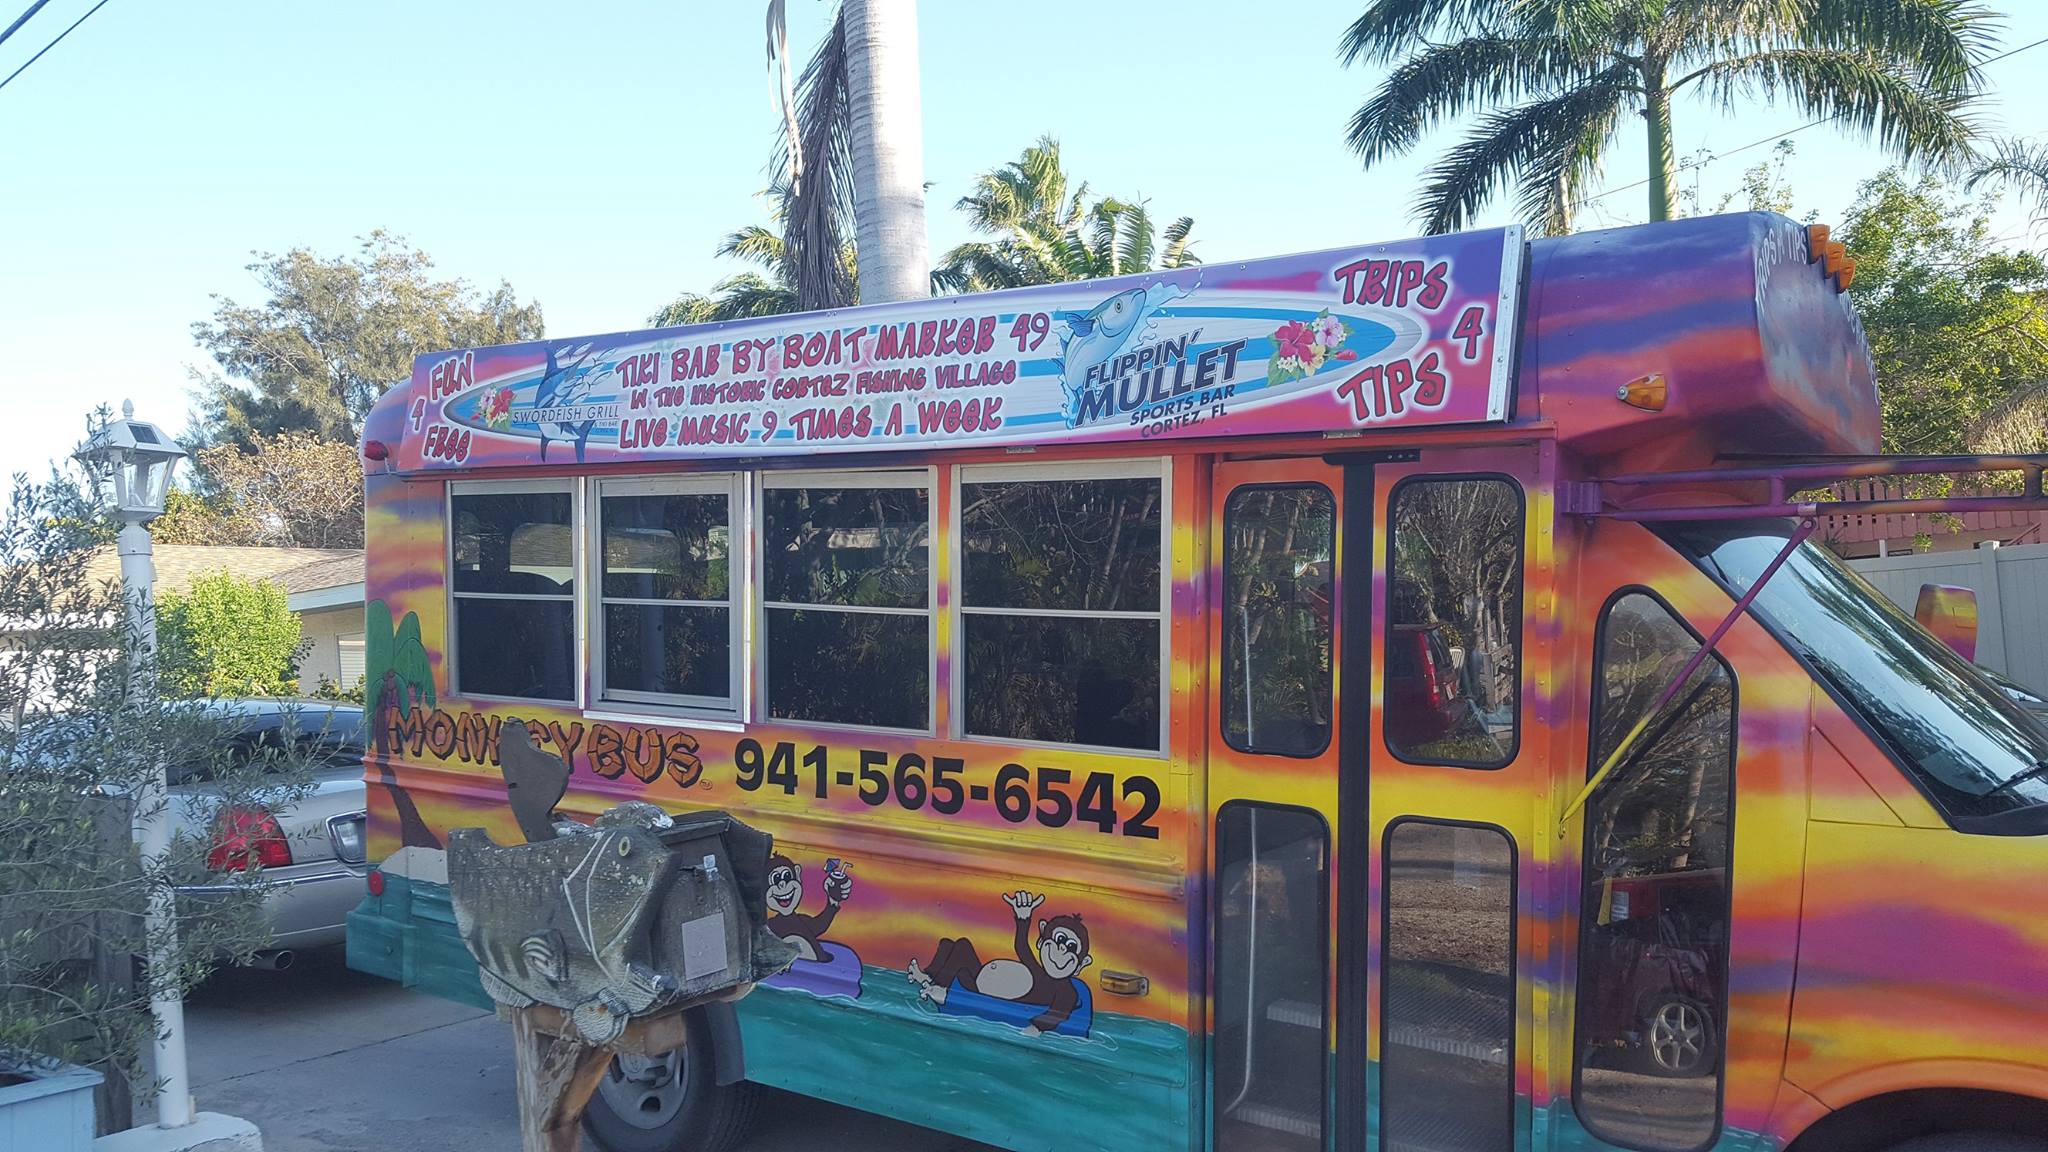 The Monkey Bus offers Free Transportation on Anna Maria Island and Beyond!